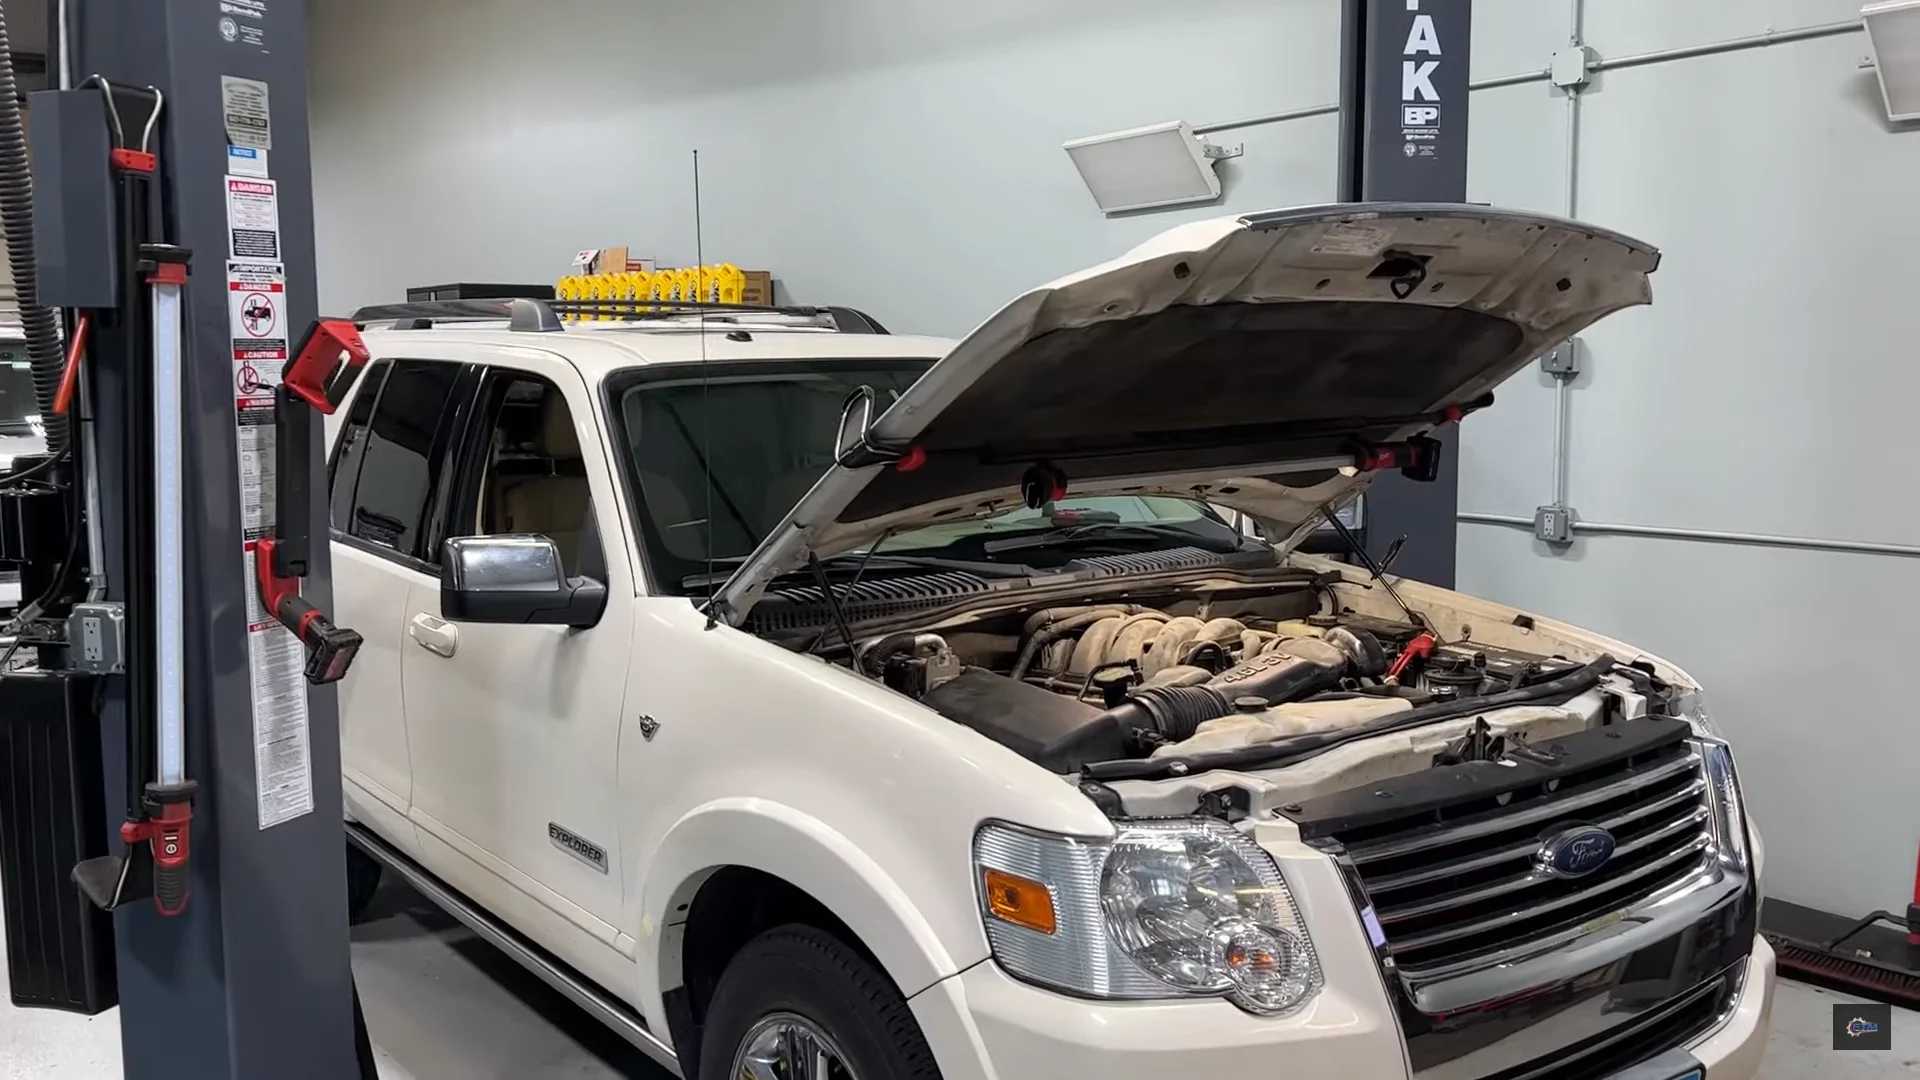 nøje ventilator Skriv email 2007 Ford Explorer A/C Failure Caused By Unexpected Culprit: Video